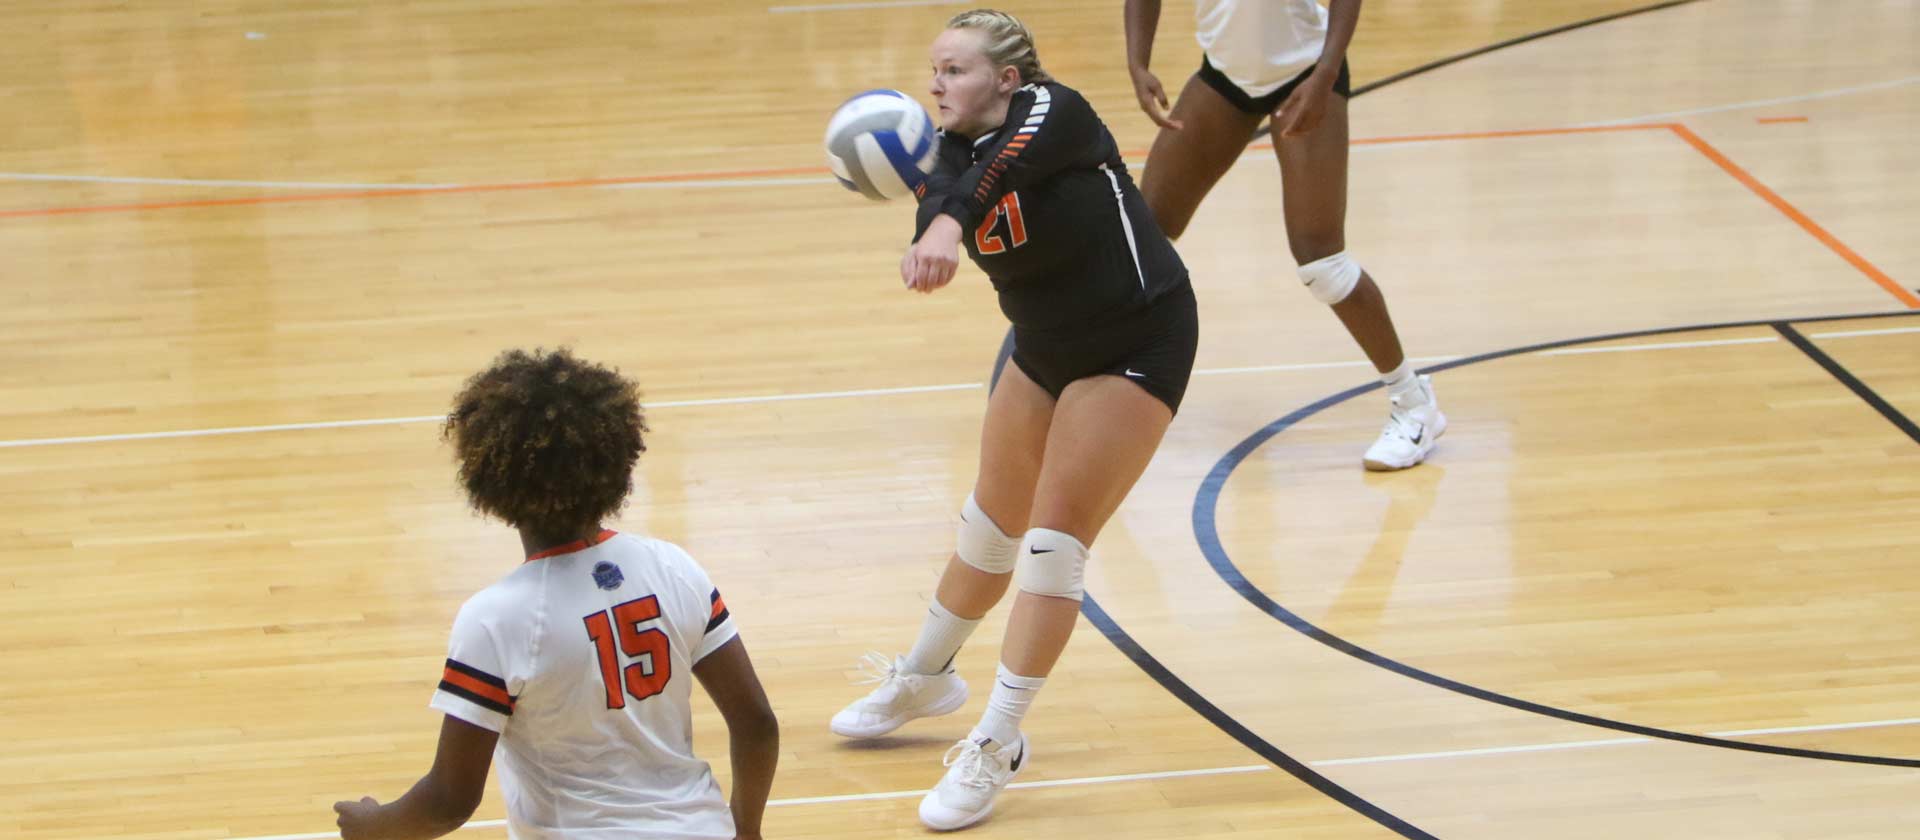 Women's volleyball handles SLIAC preseason favorite Webster in first of two scheduled fall matchups